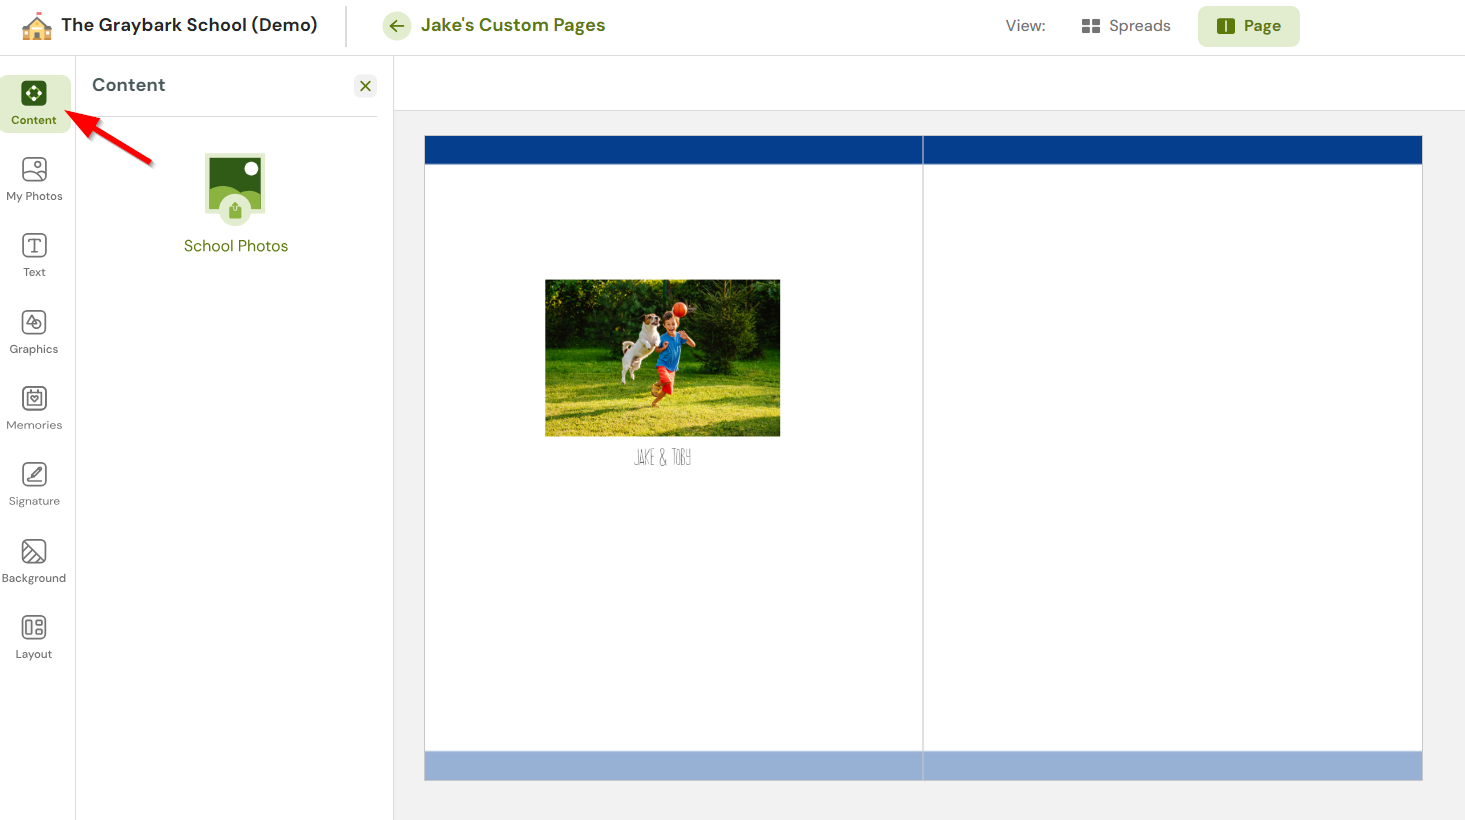 Custom Pages - Add Photos - Content - School Photos 012424.png